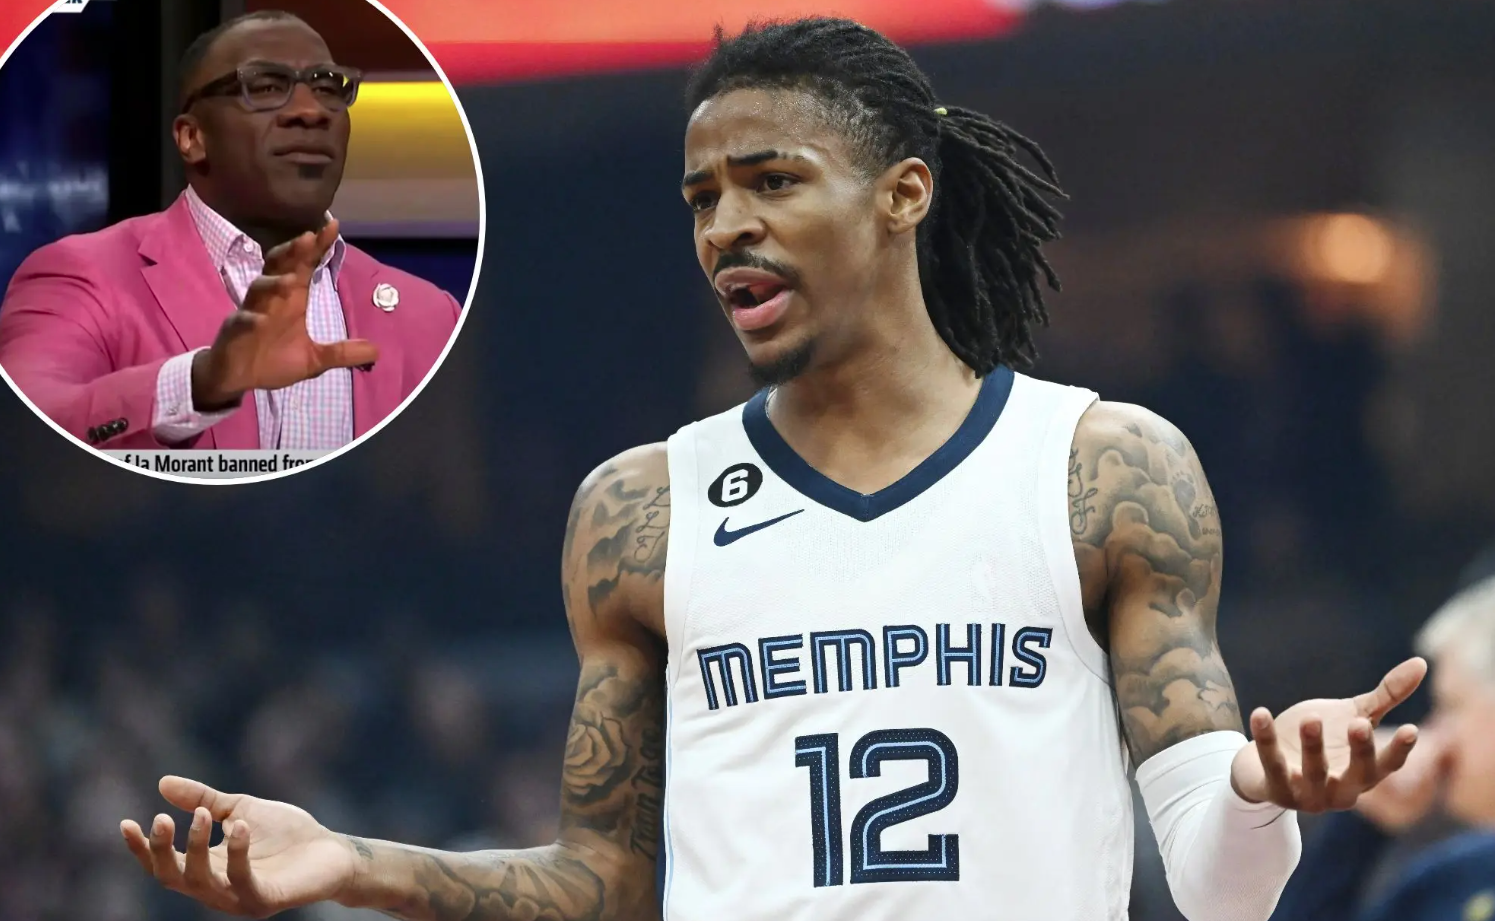 Shannon Sharpe on Ja Morant: Somebody Gon’ Come See If You About That Gunplay